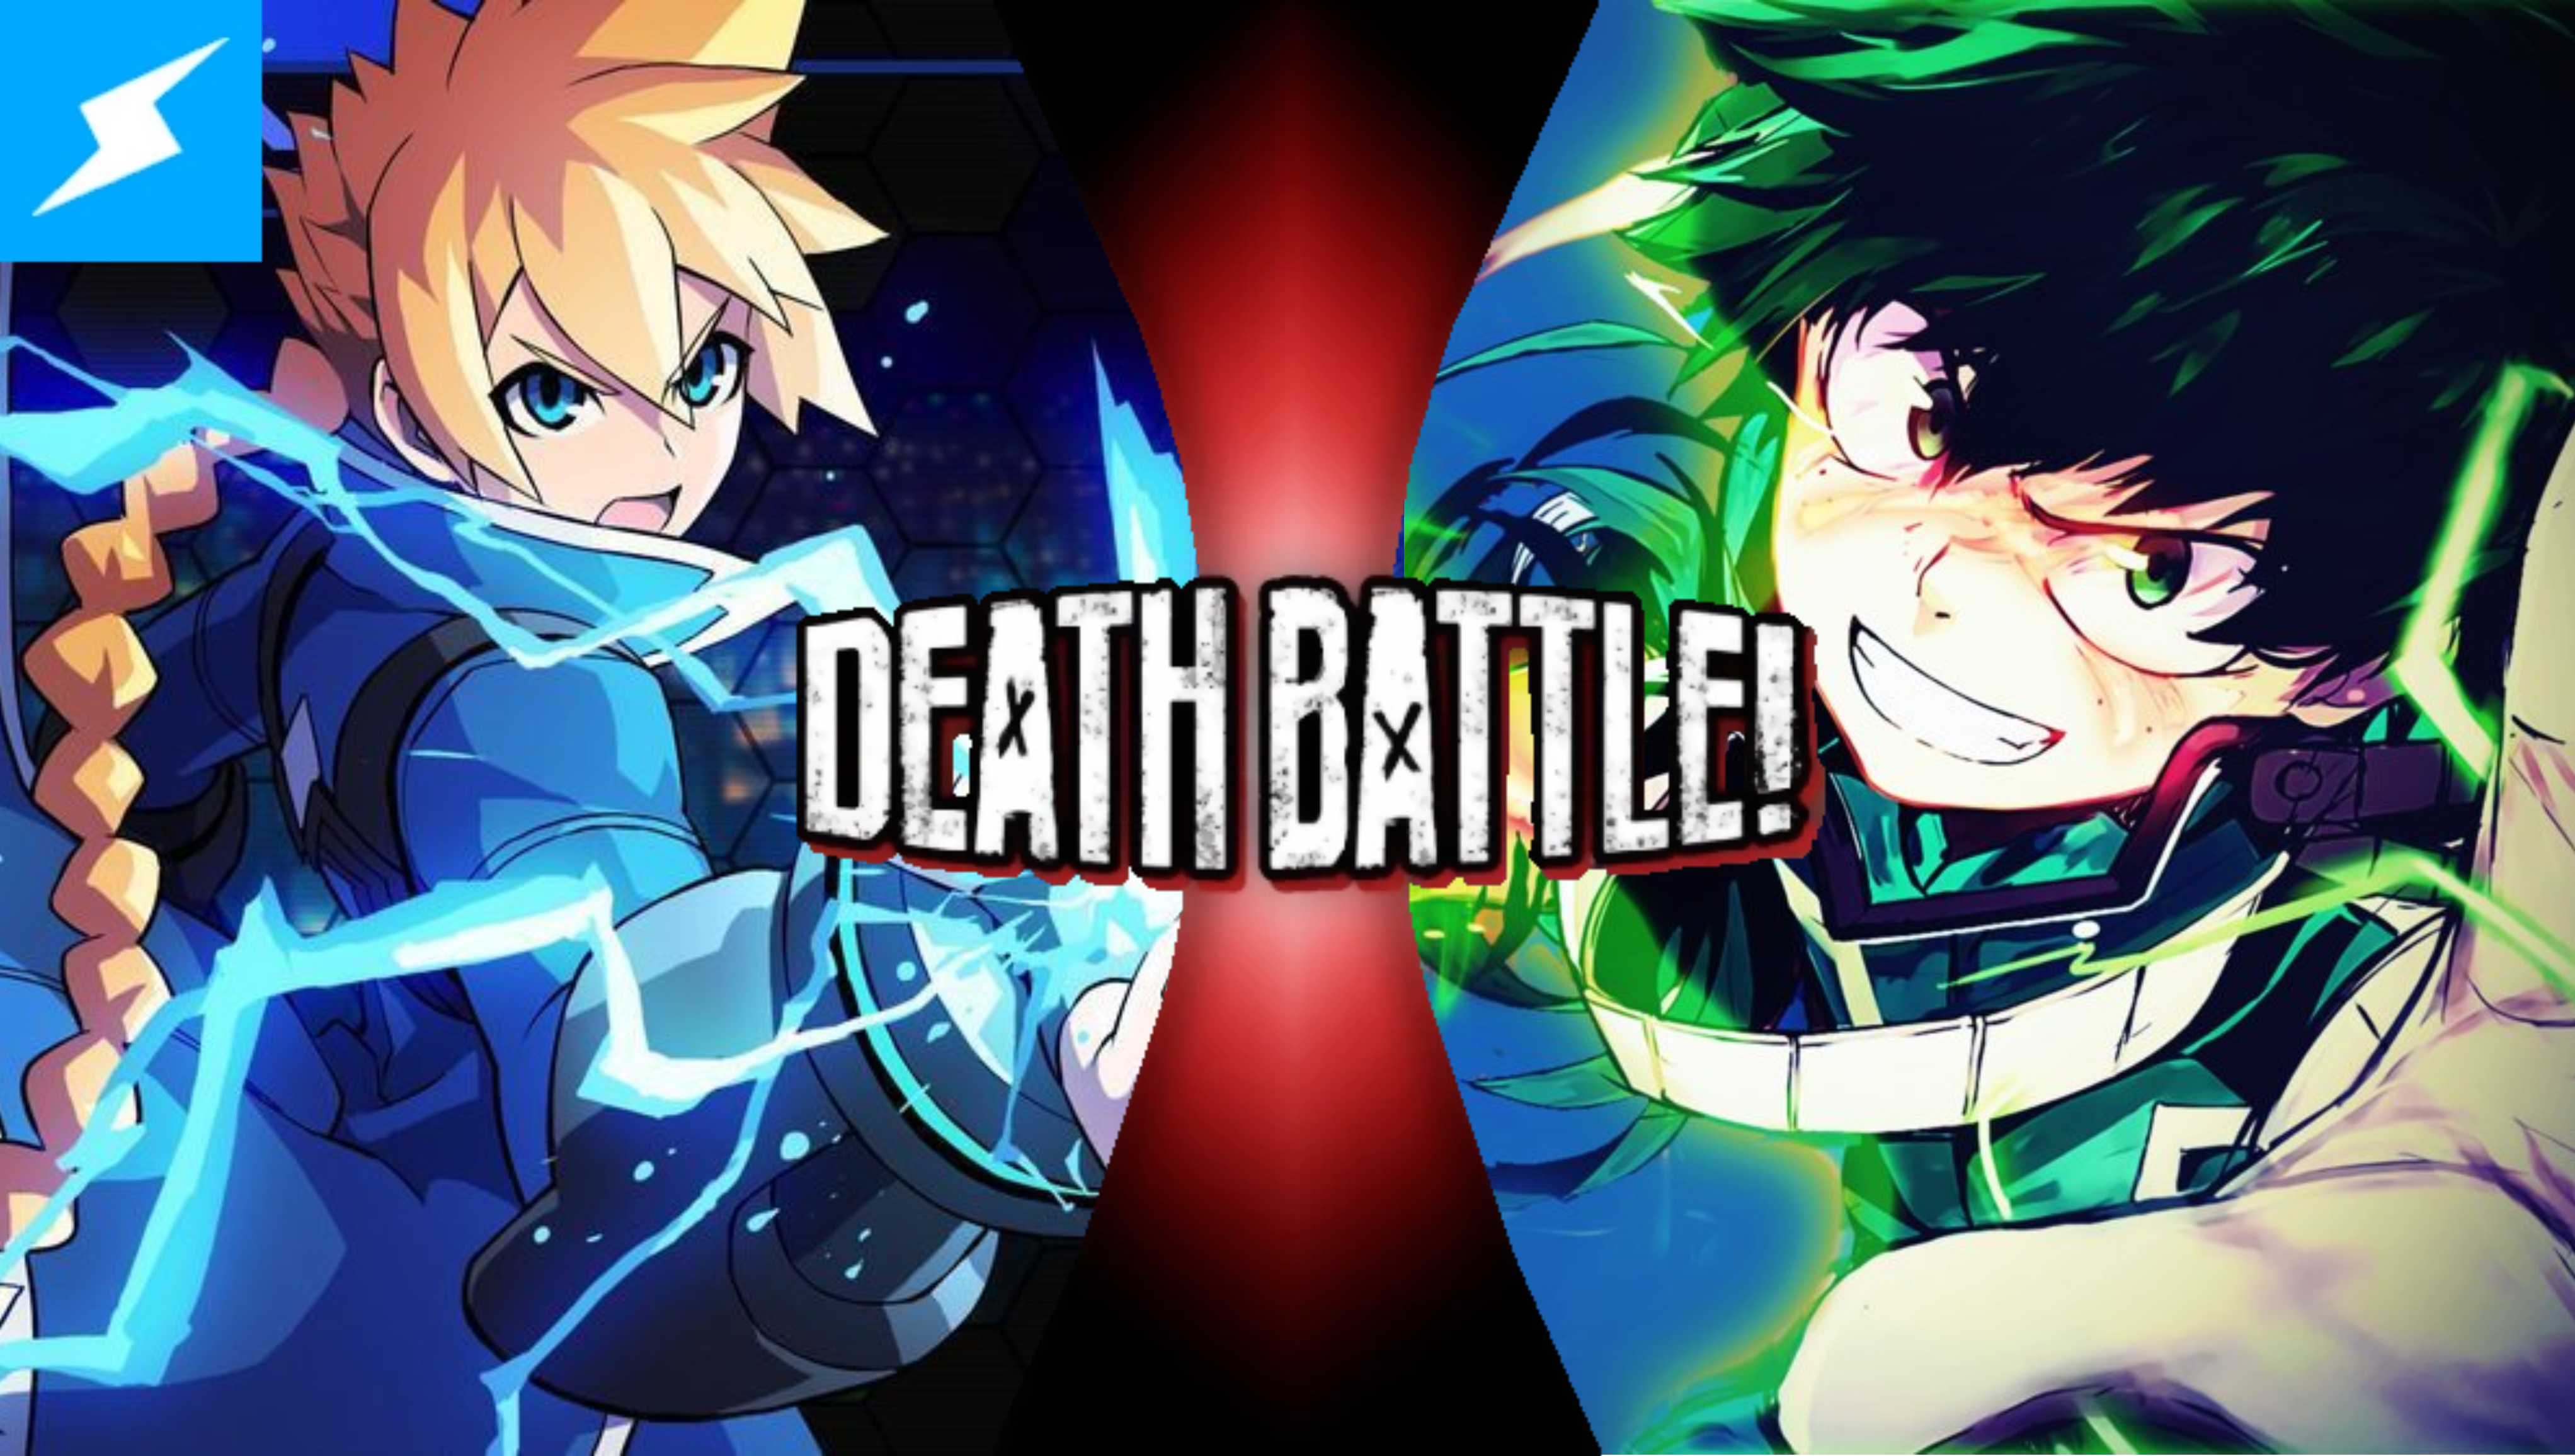 Battle Game in 5 Seconds Episode 1 Review: New Death Battle Anime